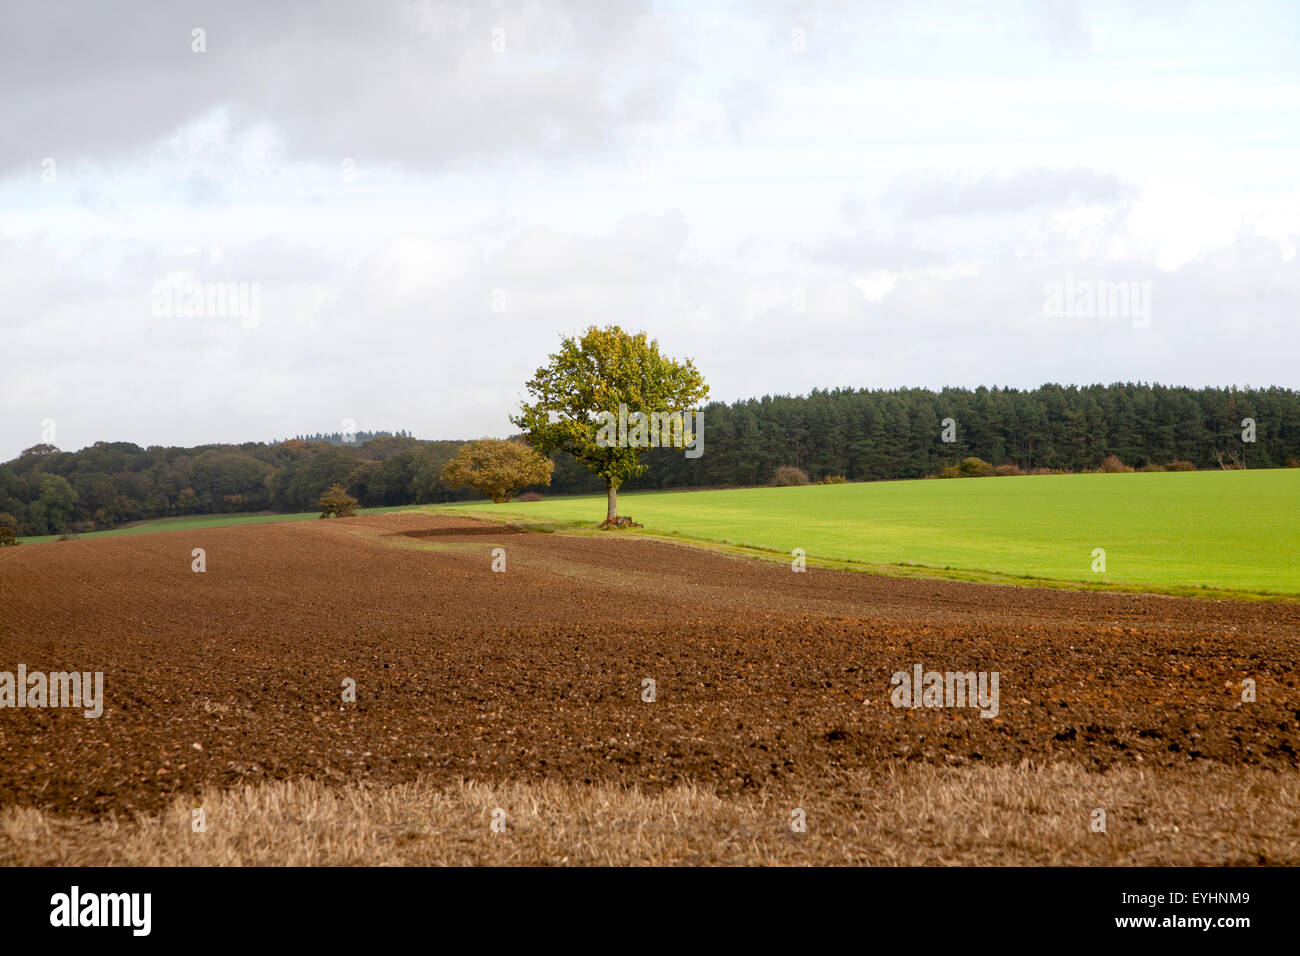 Landscape with fields and single oak tree standing alone, Chisbury, Wiltshire, England, UK Stock Photo